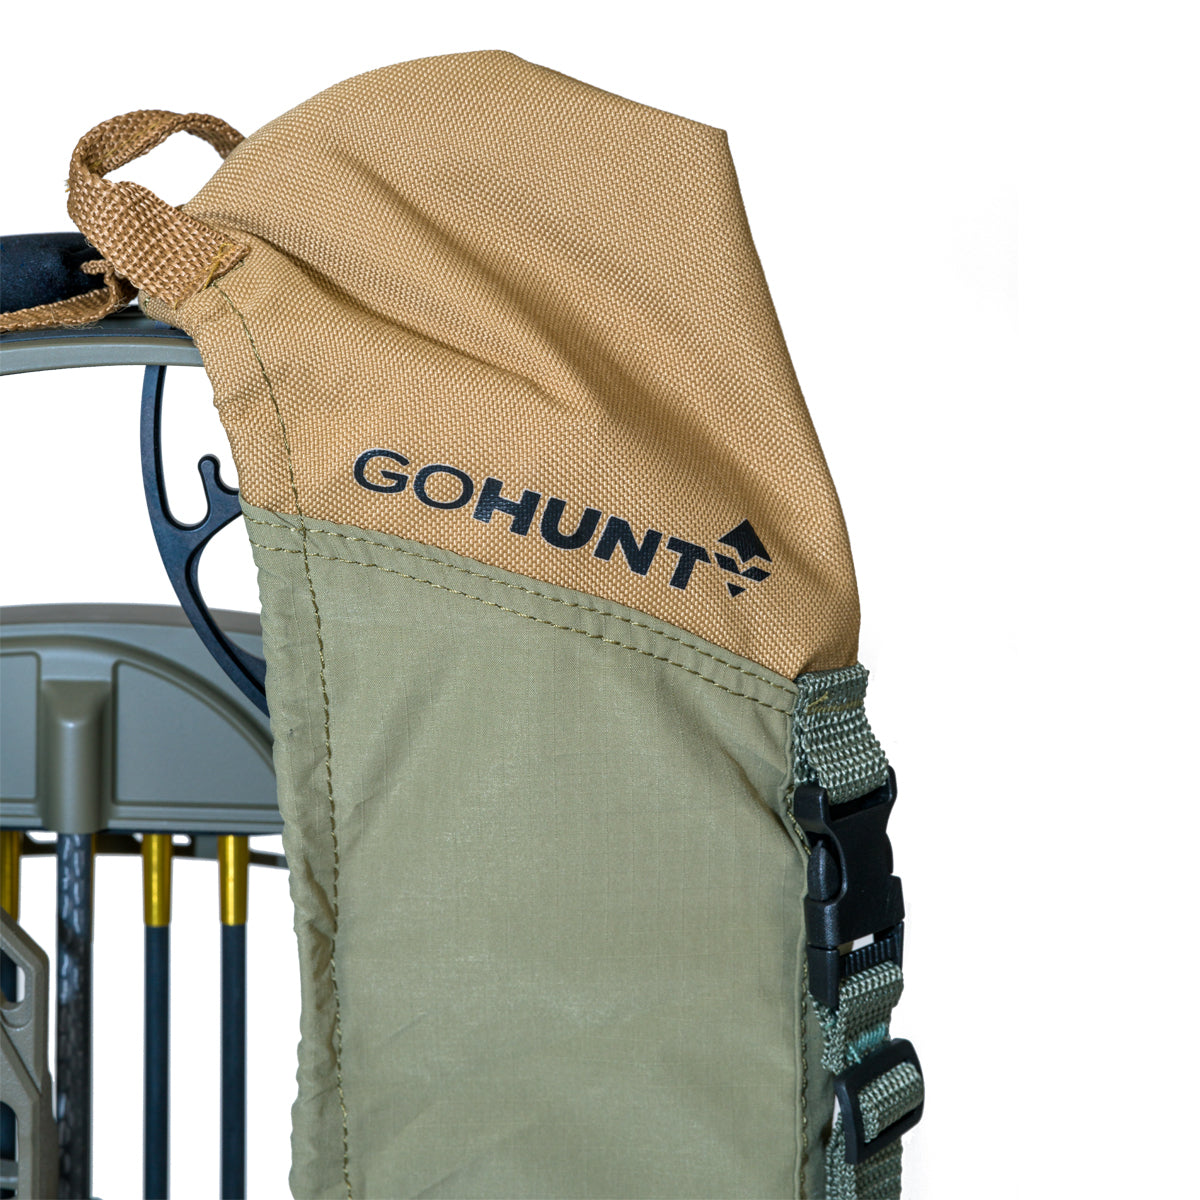 GOHUNT Compound Bow Sling in  by GOHUNT | GOHUNT - GOHUNT Shop